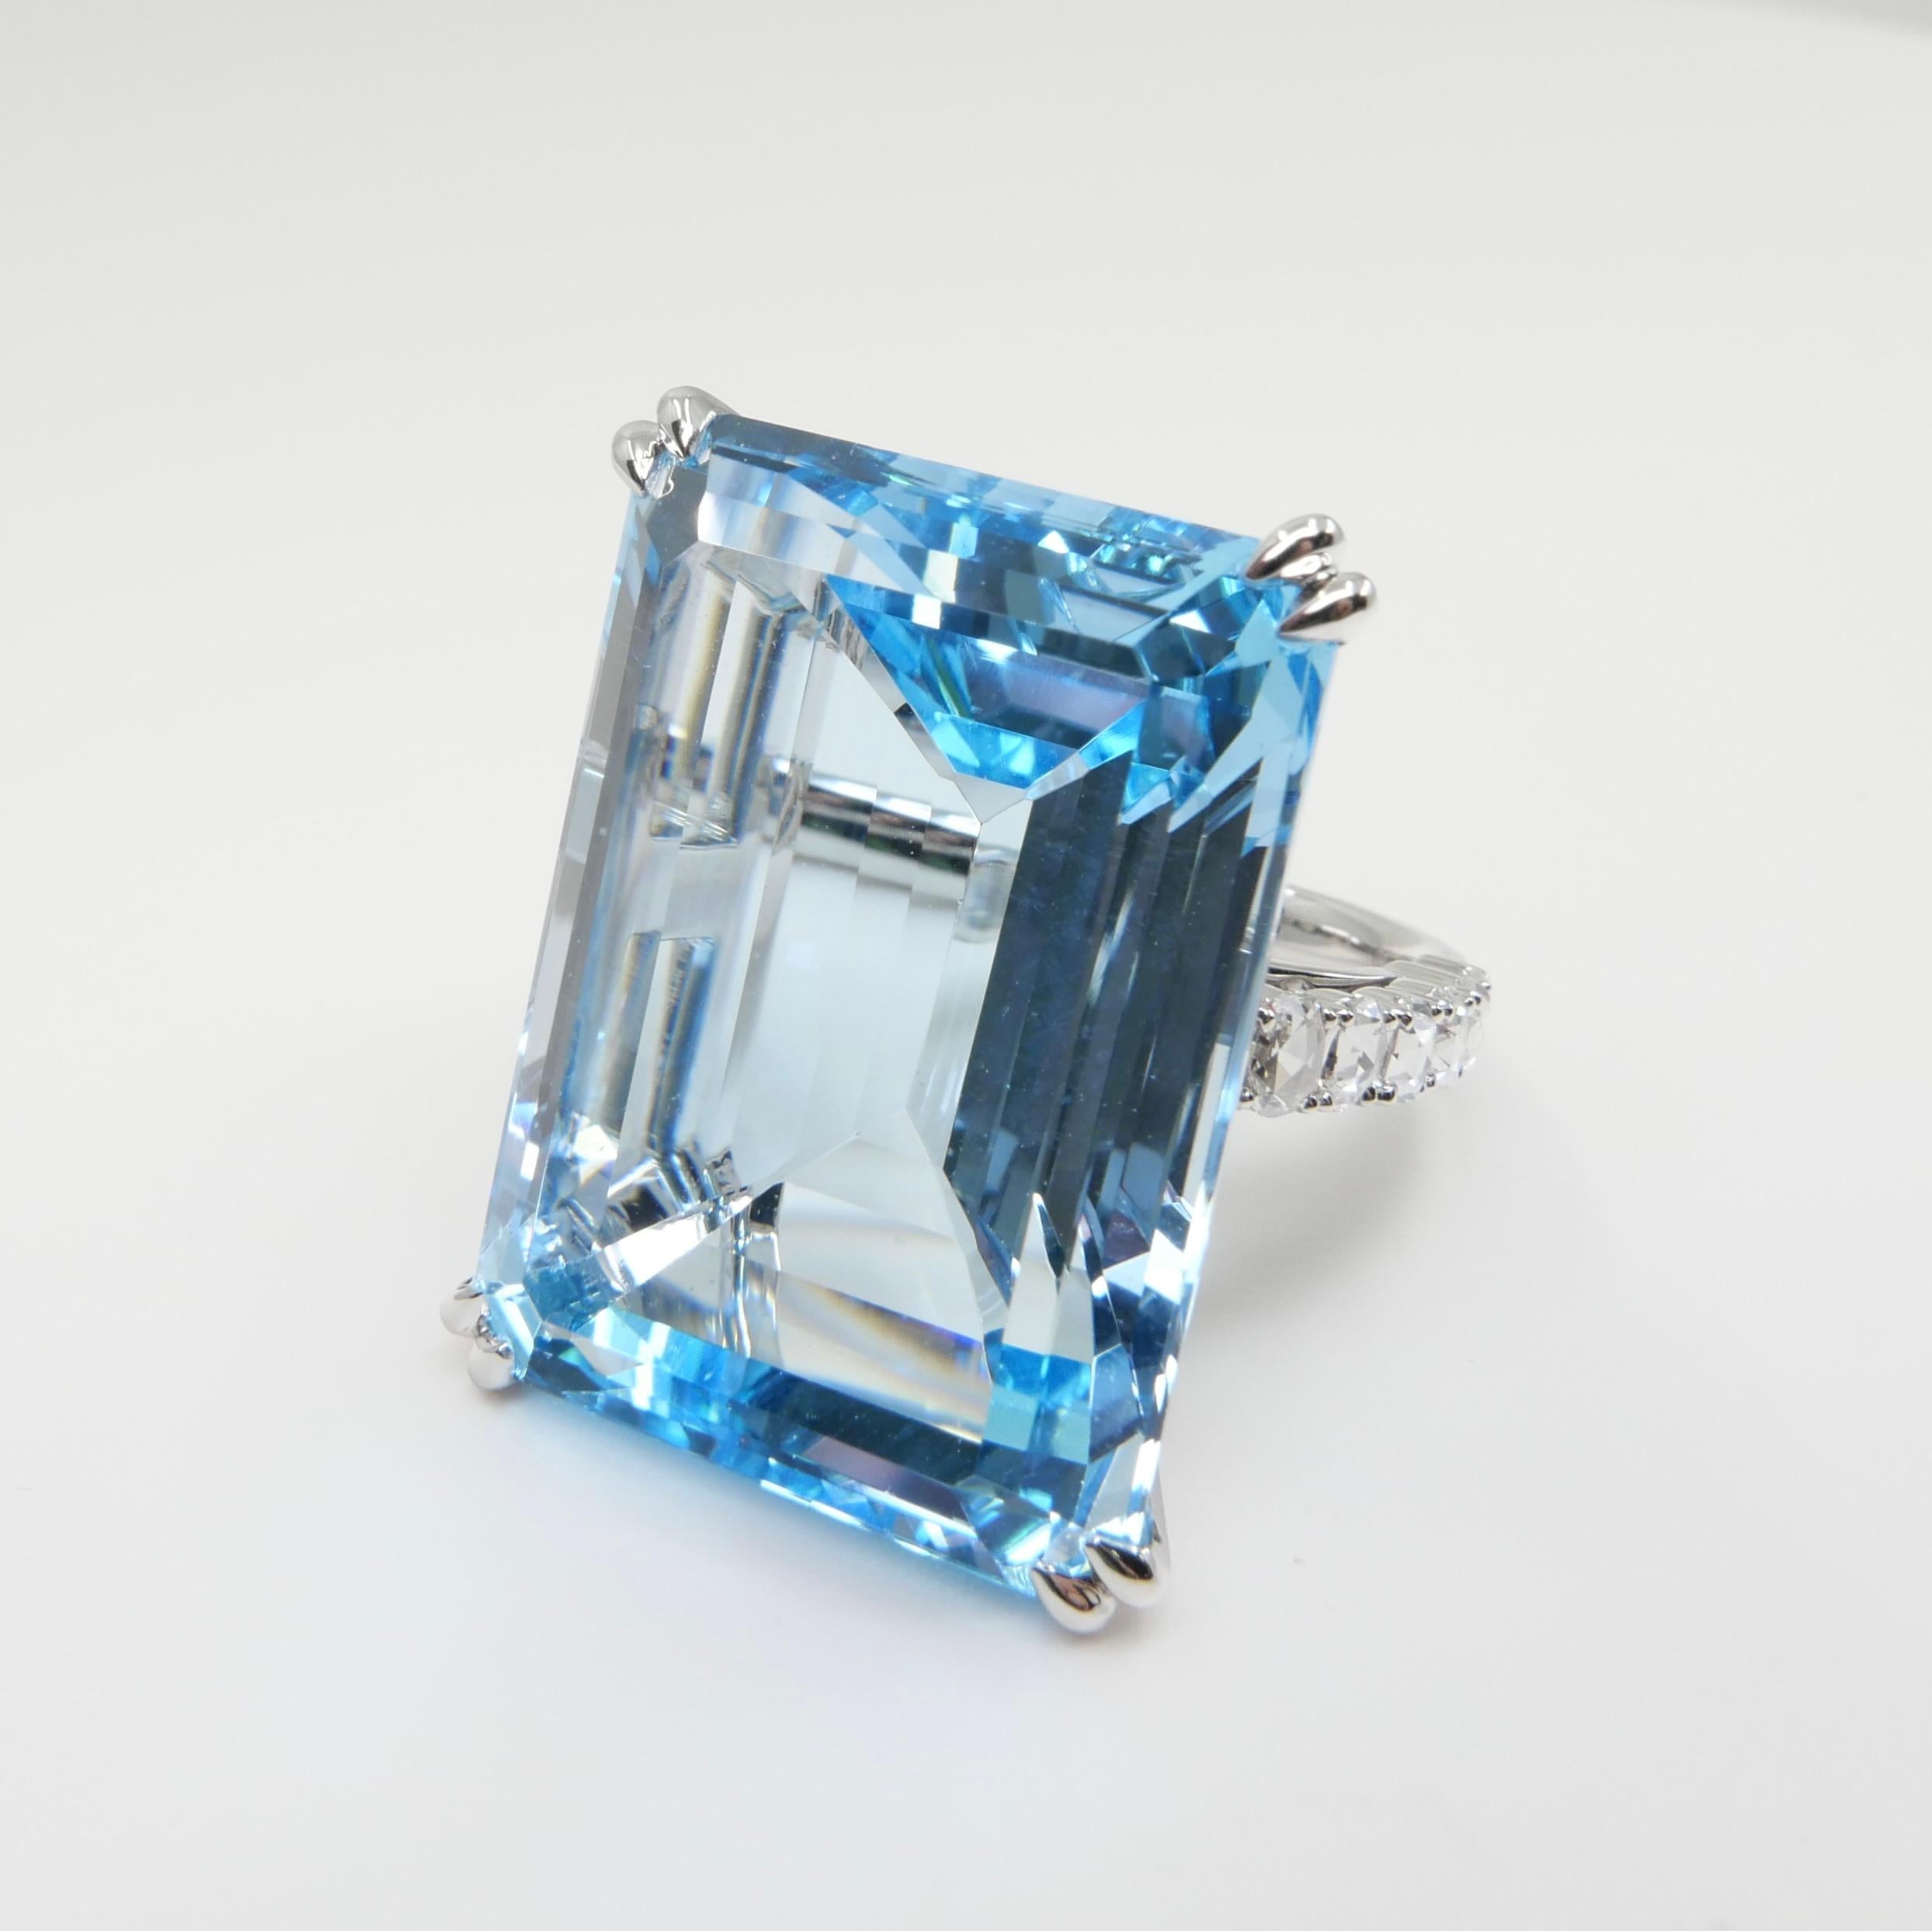 62 Cts Step Cut Blue Topaz & Rose Cut Diamond Cocktail Ring, Substantial For Sale 5